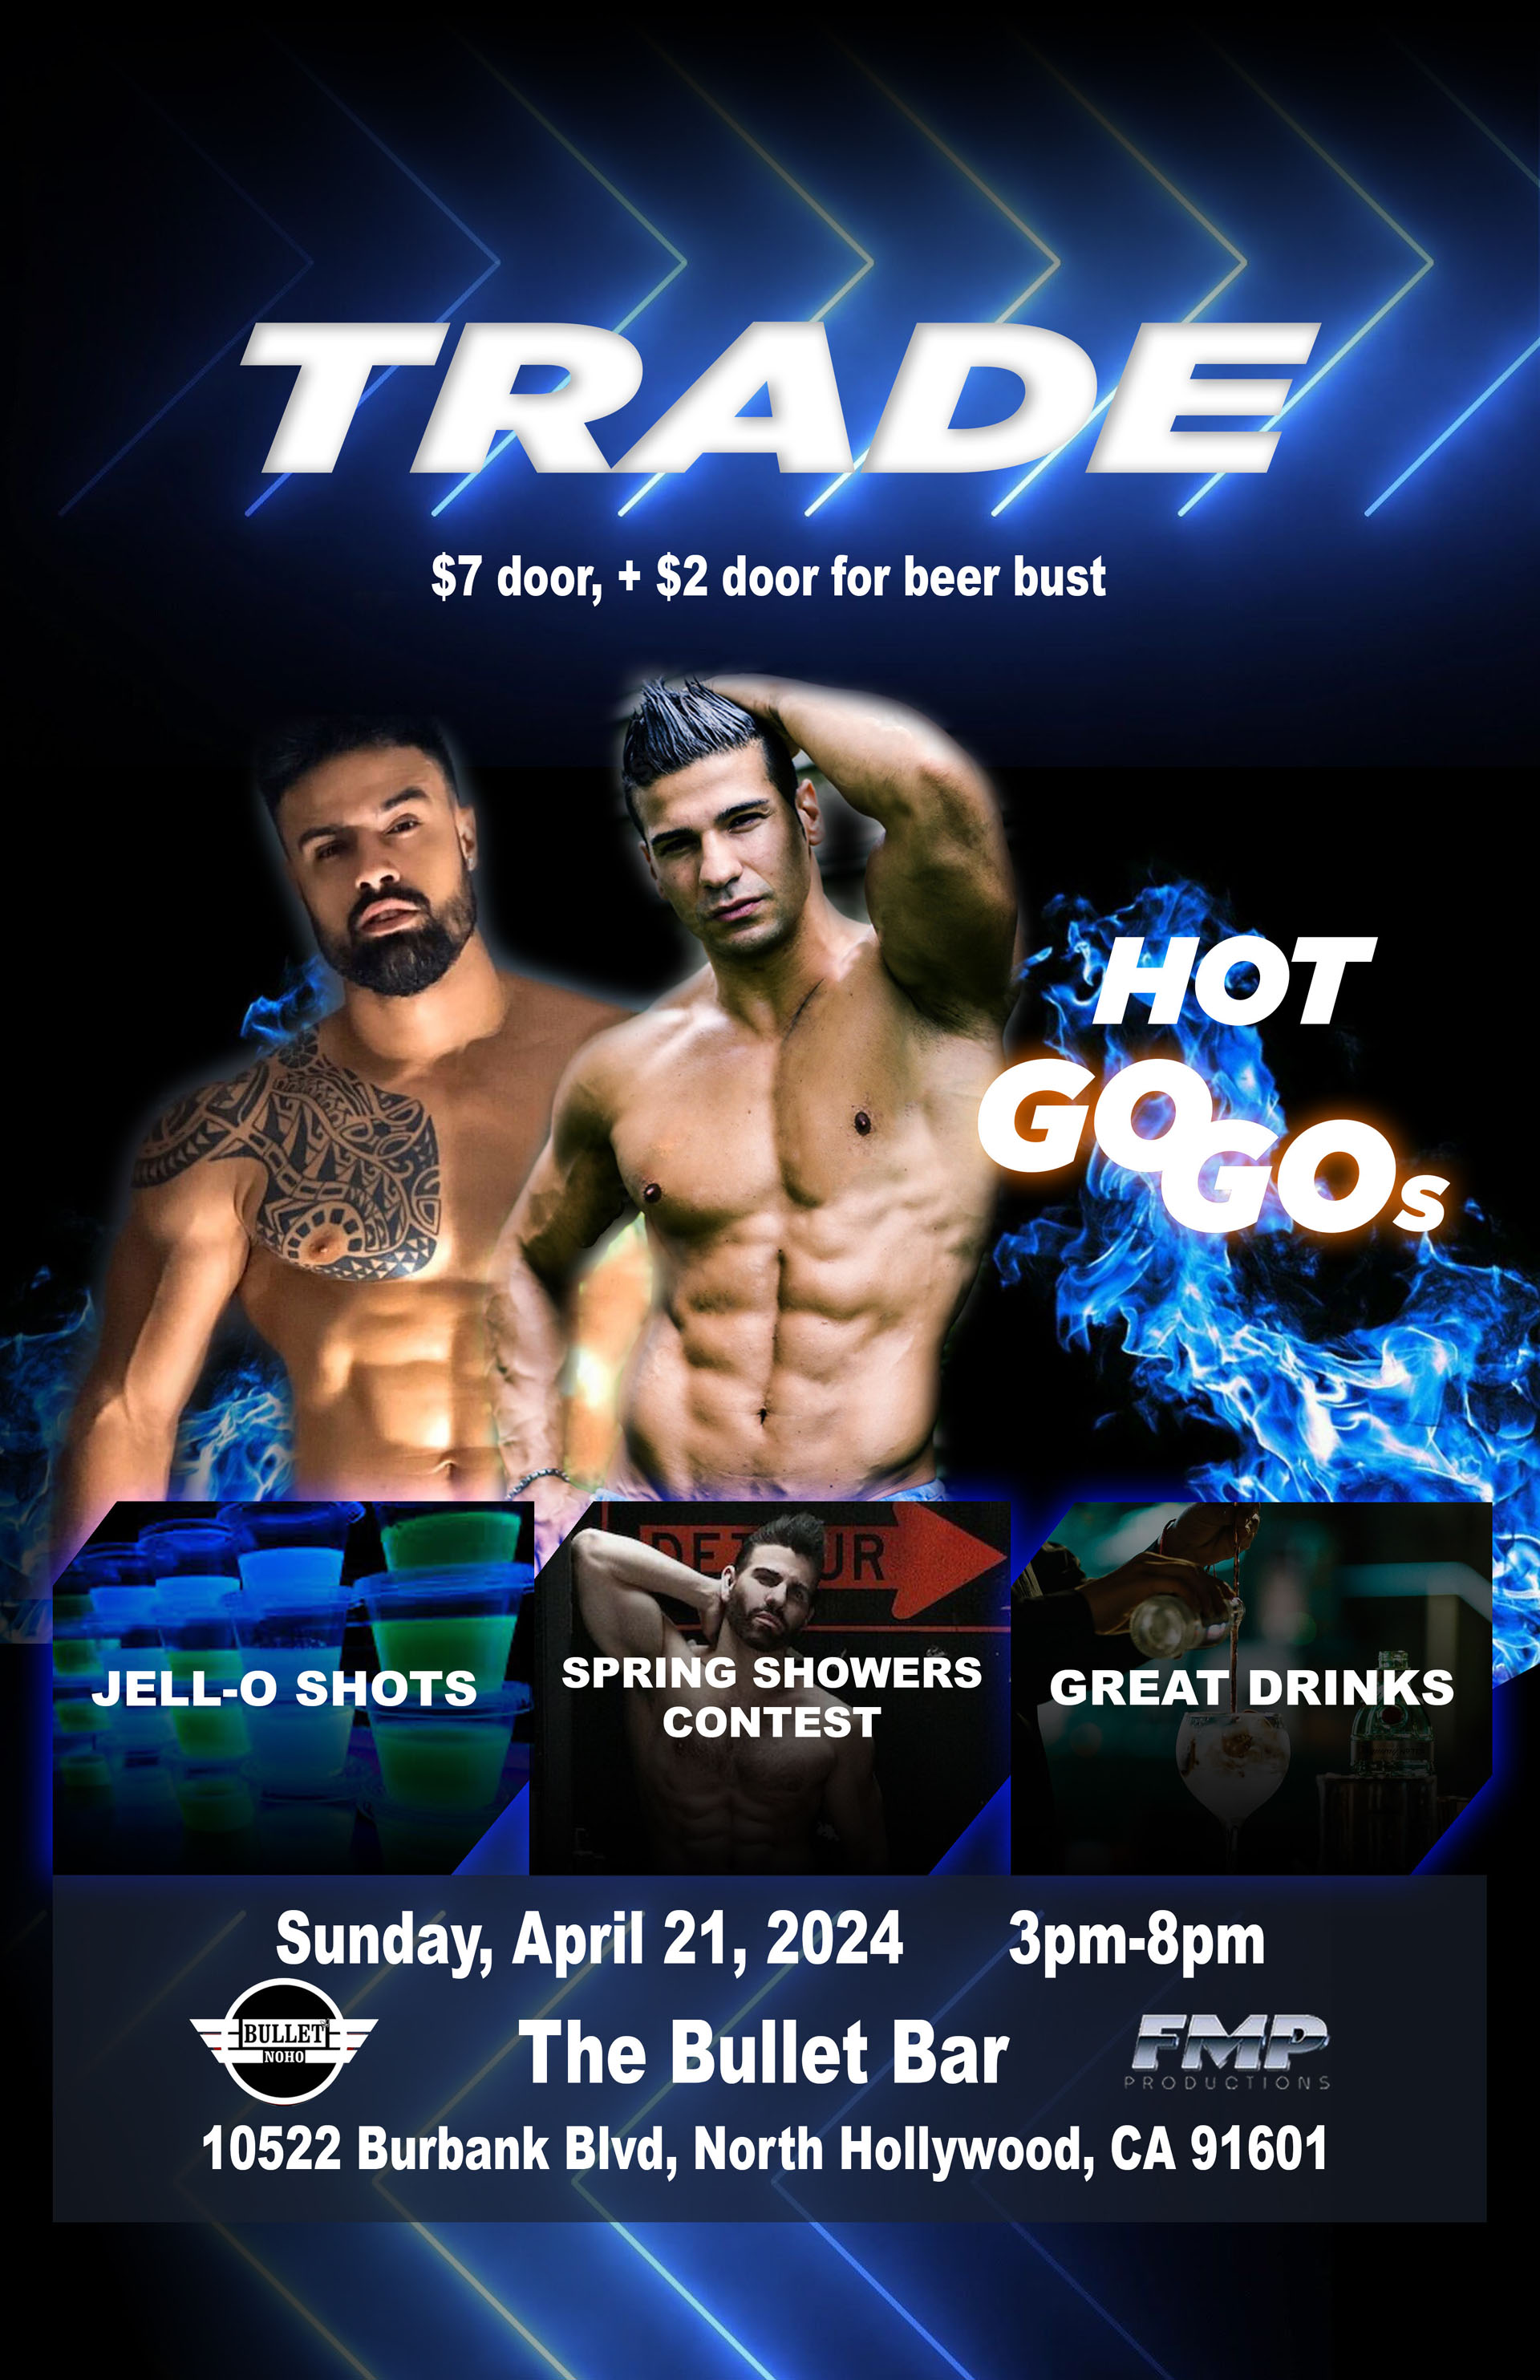 THE BULLET BAR and FMP PRODUCTIONS Present TRADE SUNDAY--BEST BUNS CONTEST: Sunday, 04/21/24 from 3:00 PM to 8:00 PM! JELL-O Shots! Spring Showers Contest! $7 door + $2 door for beer bust